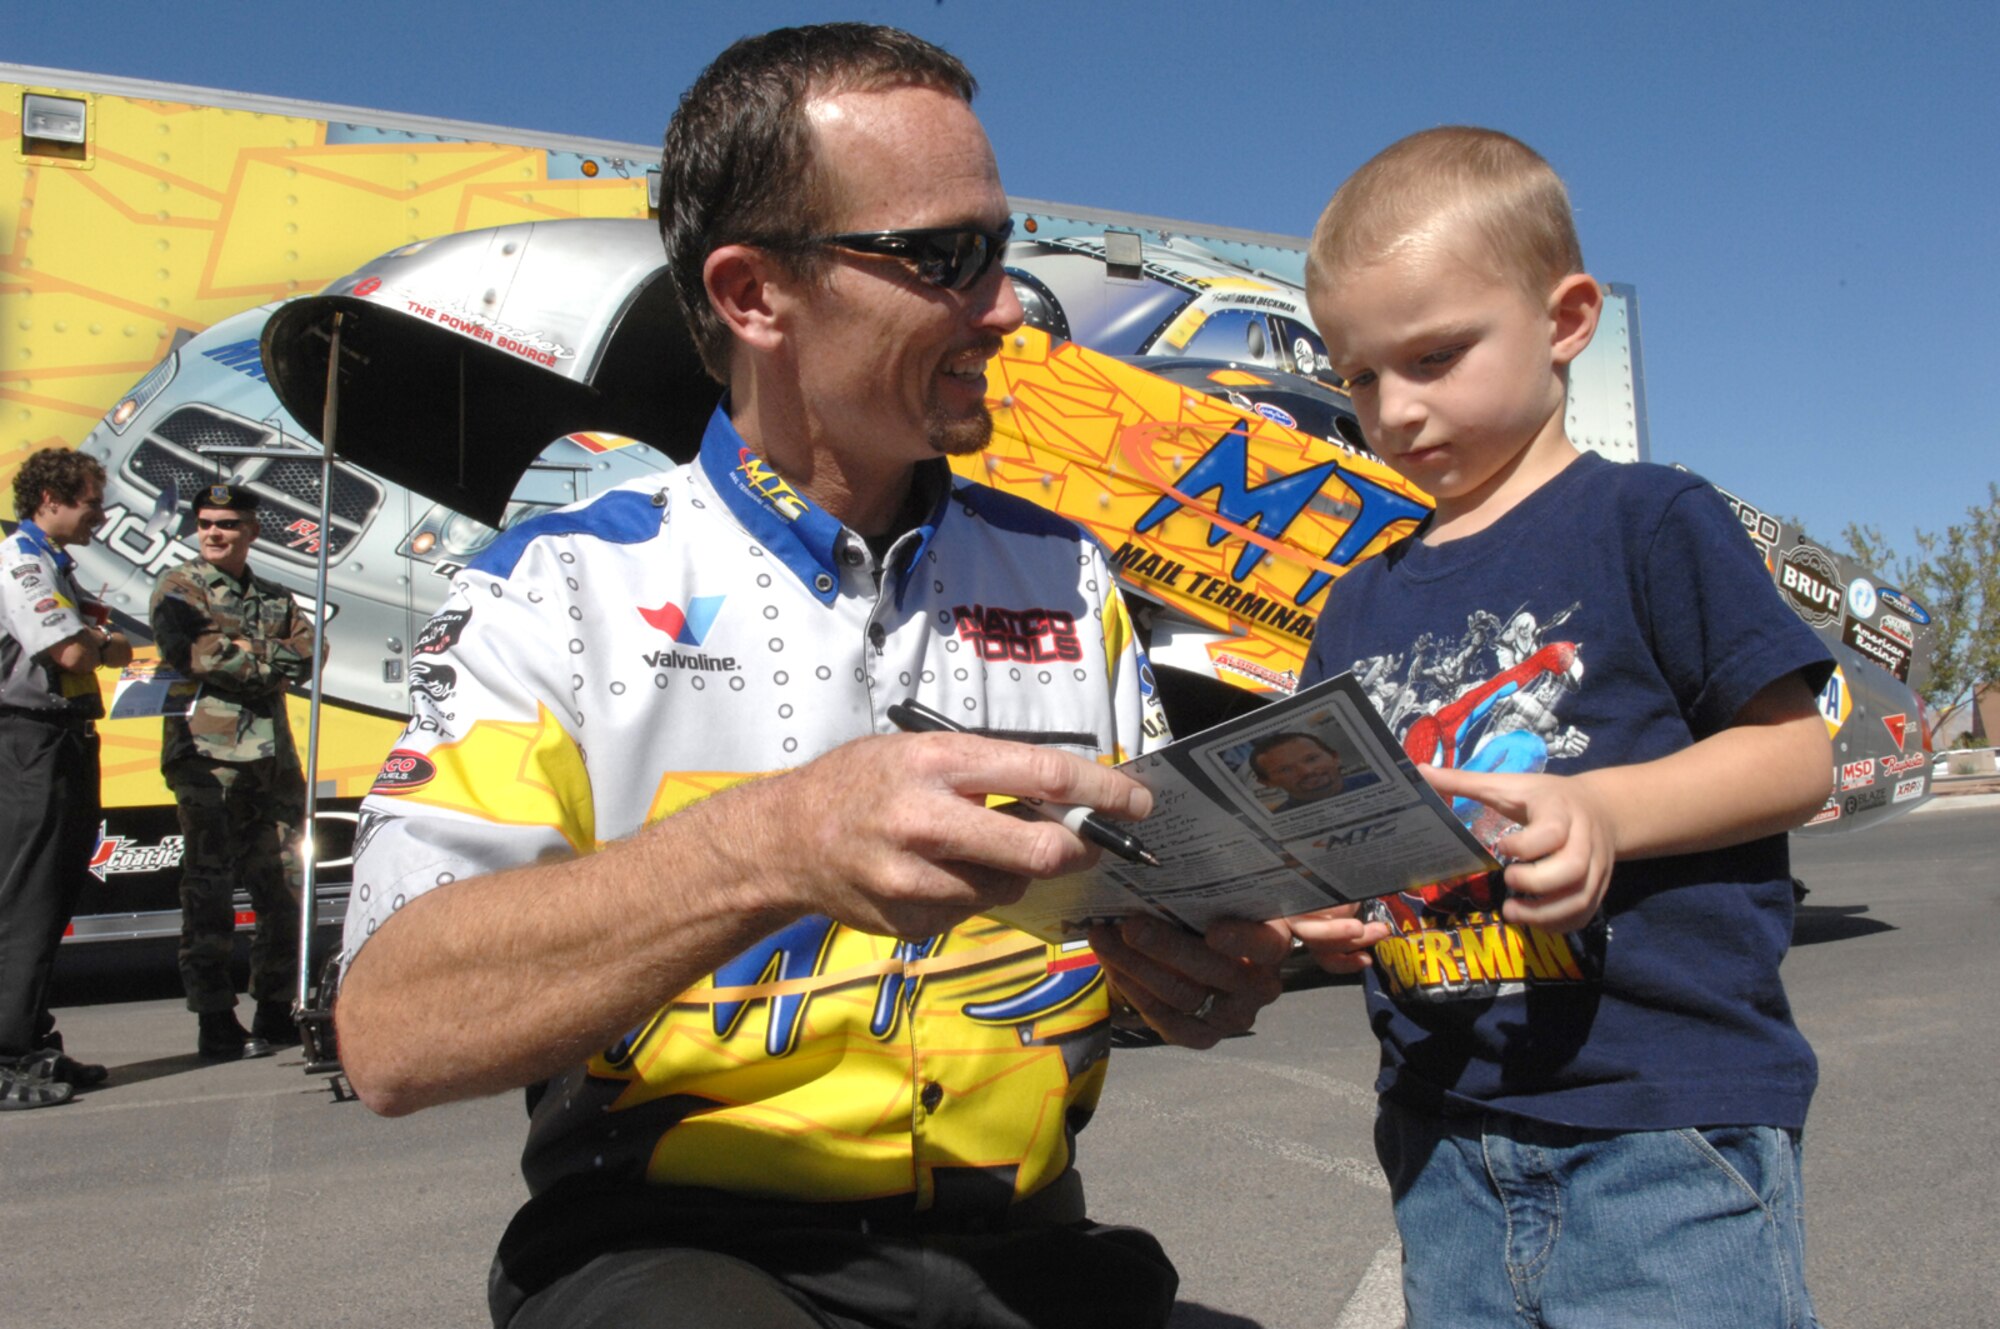 Former Air Force Sgt. Jack Beckman, now turned Funny racecar driver for Don Schumacher Racing, autographs a souvenir for Nick Millikan, 4, Oct. 24 at the Nellis Base Exchange parking lot. Jack Beckman and other National Hot Rod Association drivers stopped by Nellis for a military community “meet-and-greet” before racing in Las Vegas. (U.S. Air Force Photo by Senior Airman Larry E. Reid Jr.)